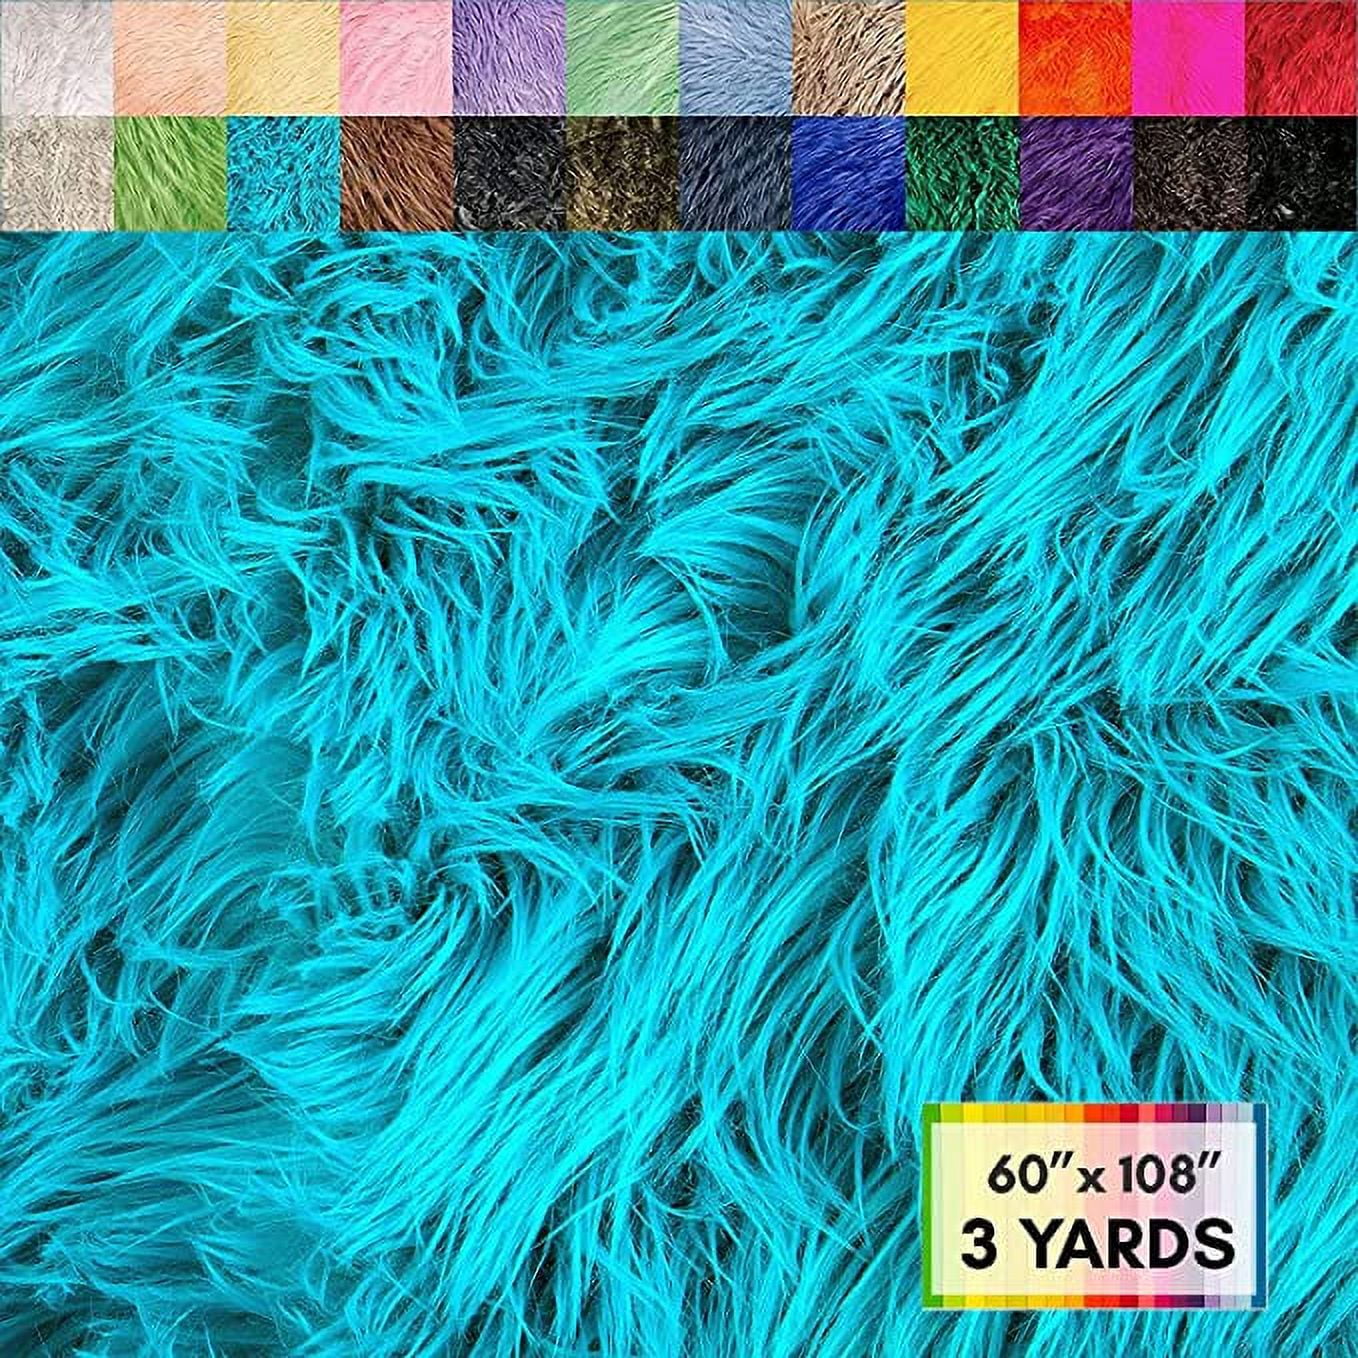 FabricLA Shaggy Faux Fur Fabric by The Yard - 18 x 60 Inches (45 cm x 150  cm) - Craft Furry Fabric for Sewing Apparel, Rugs, Pillows, and More 